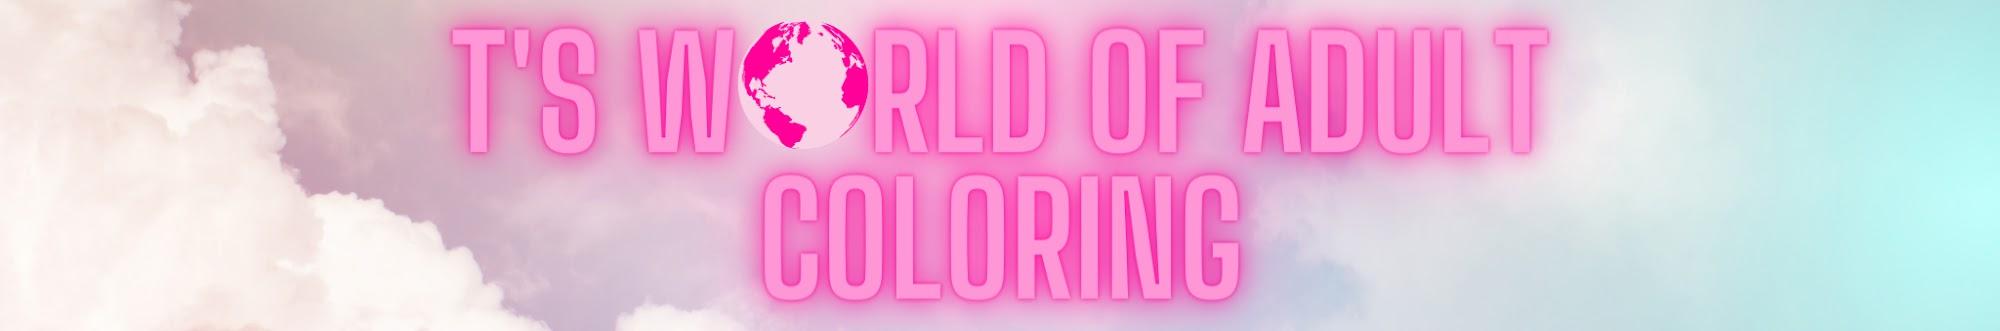 T's World Of Adult Coloring